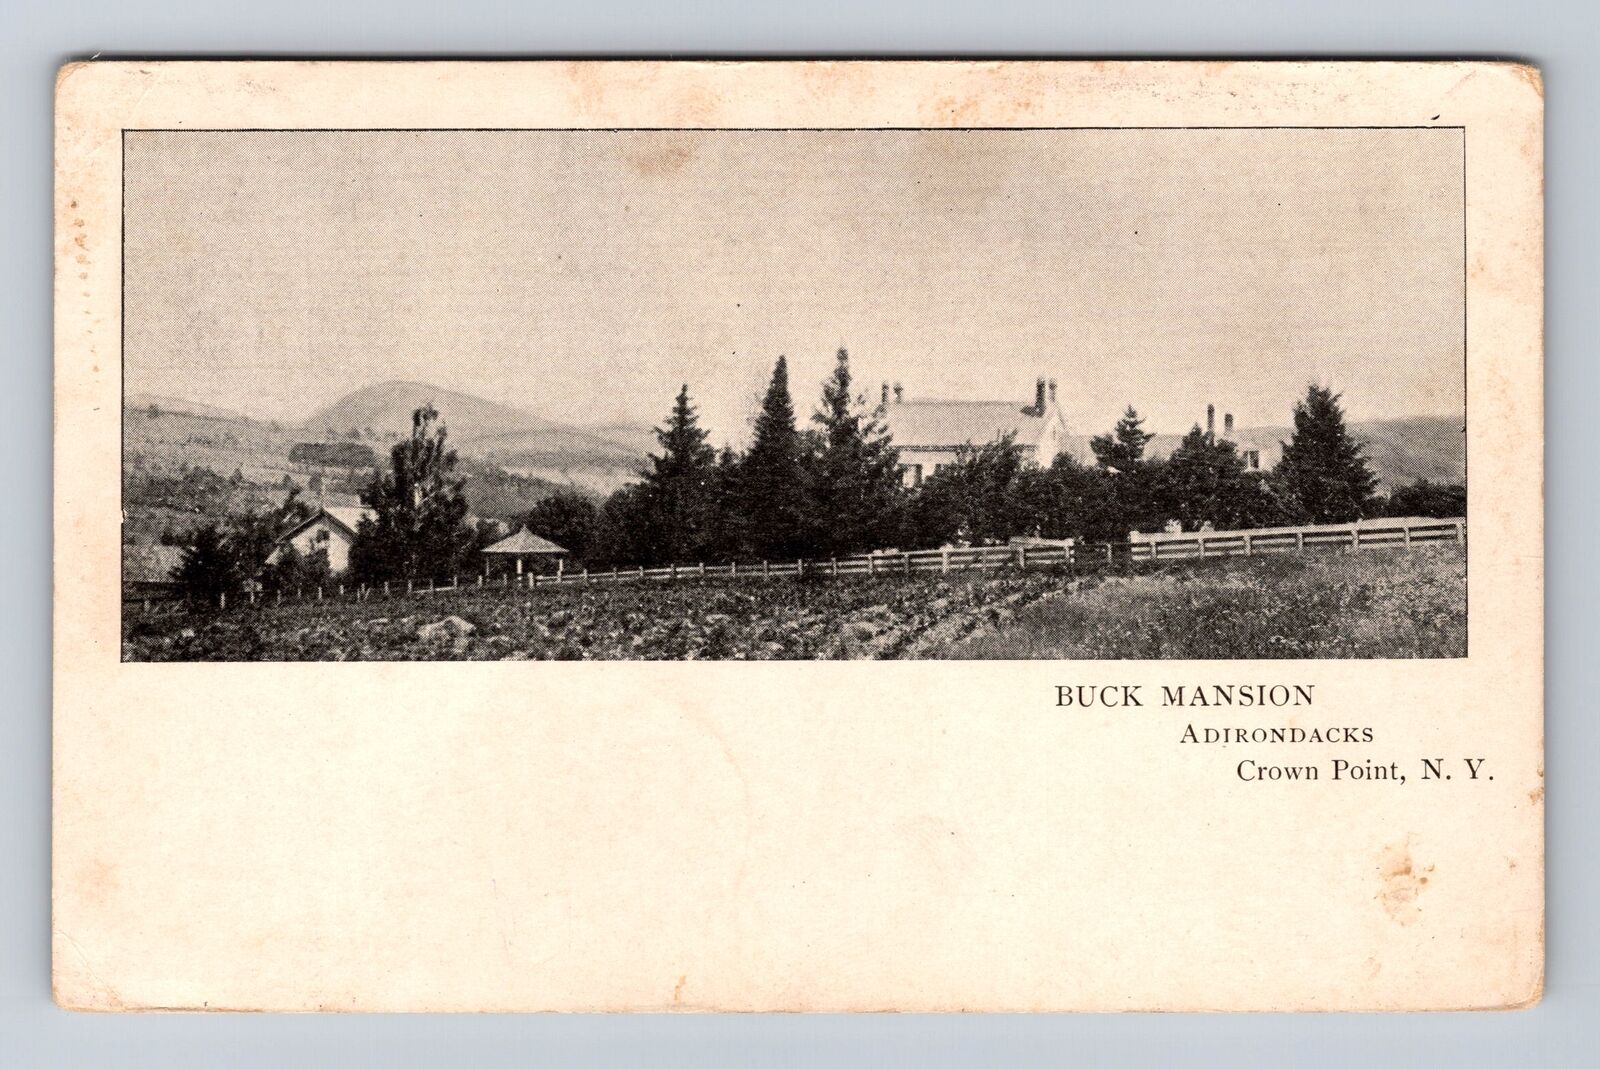 Crown Point NY-New York, Buck Mansion in the Adirondacks, Vintage c1905 Postcard